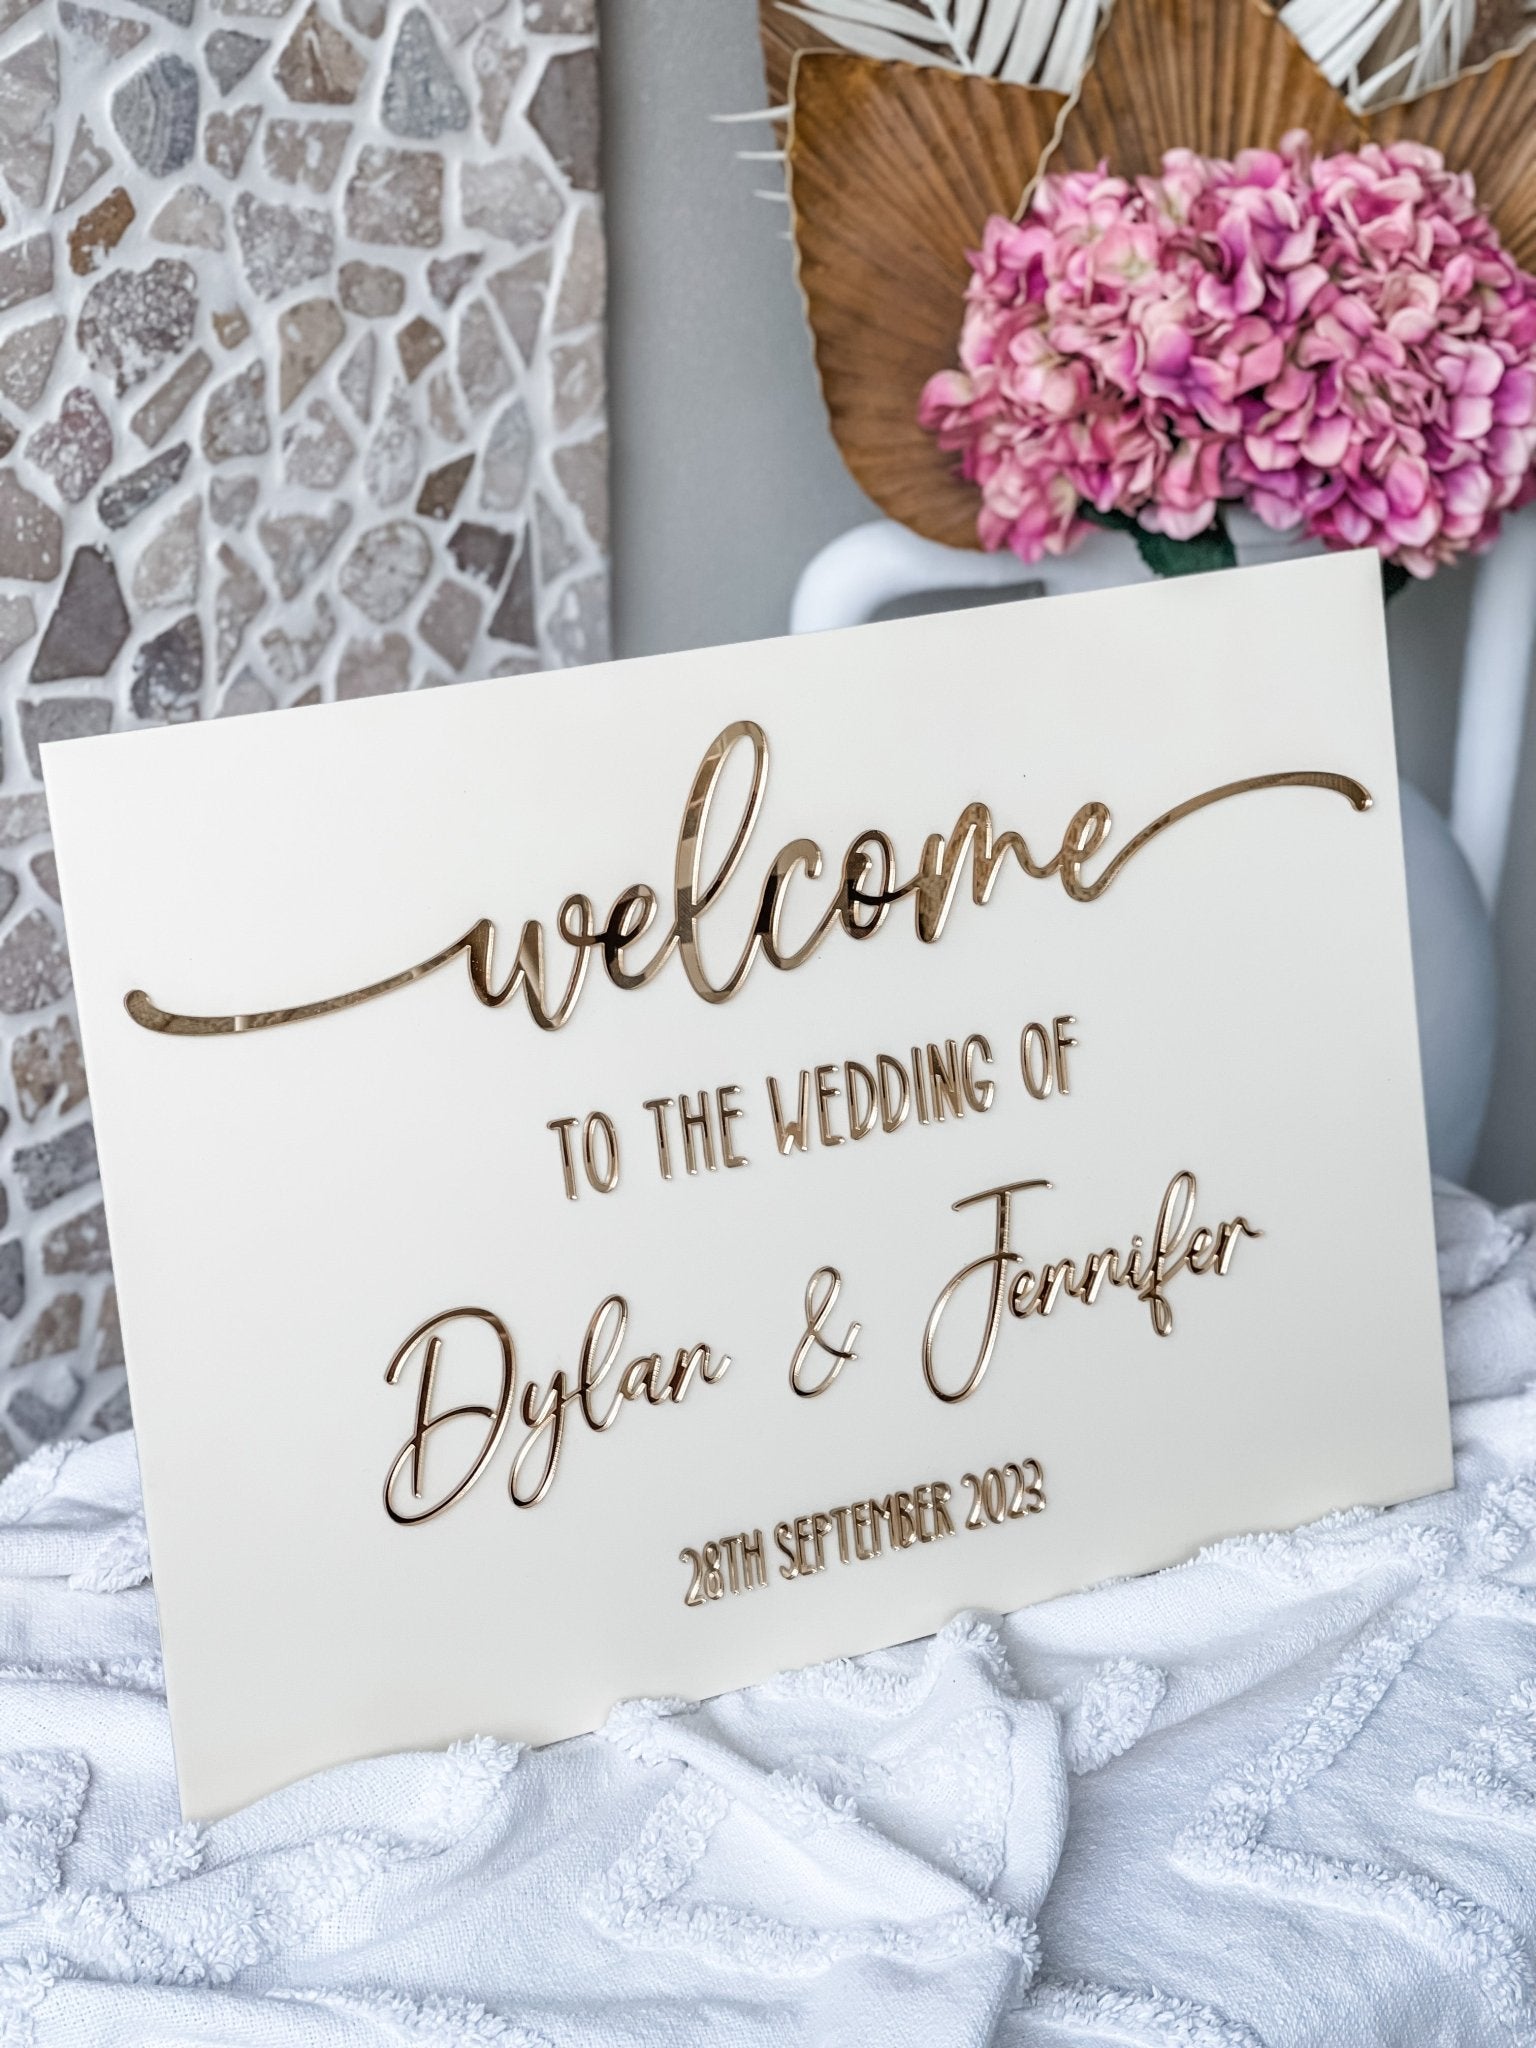 Event signage - The Humble Gift Co.